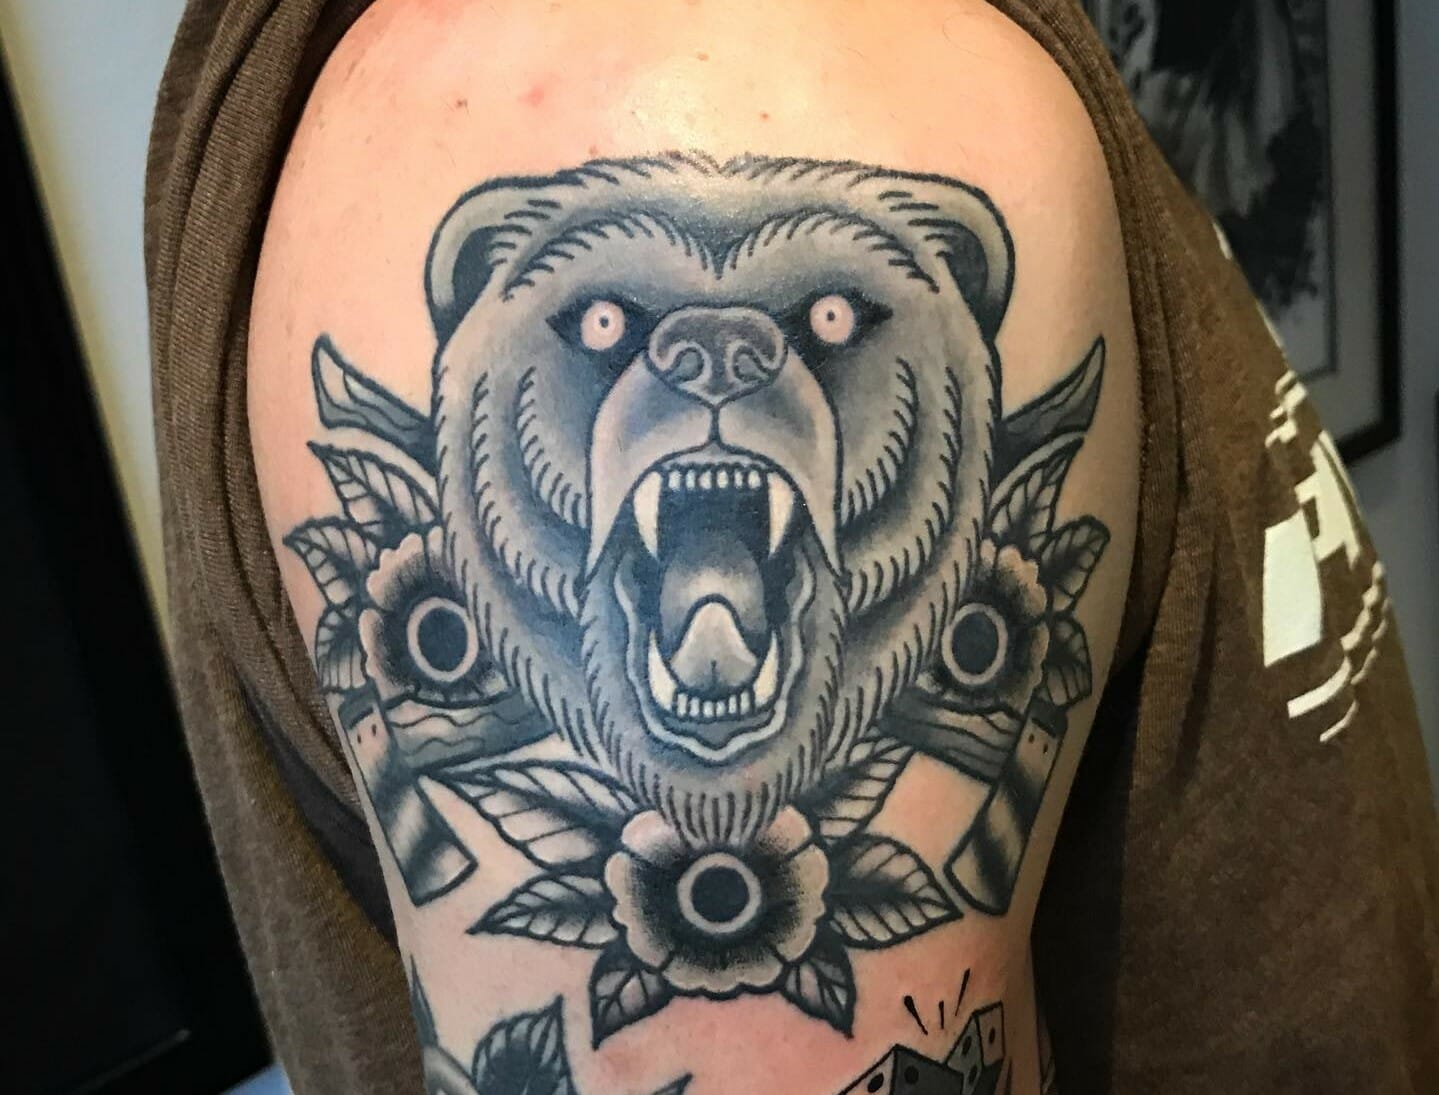 4. Tiny Grizzly Bear Tattoo - wide 2